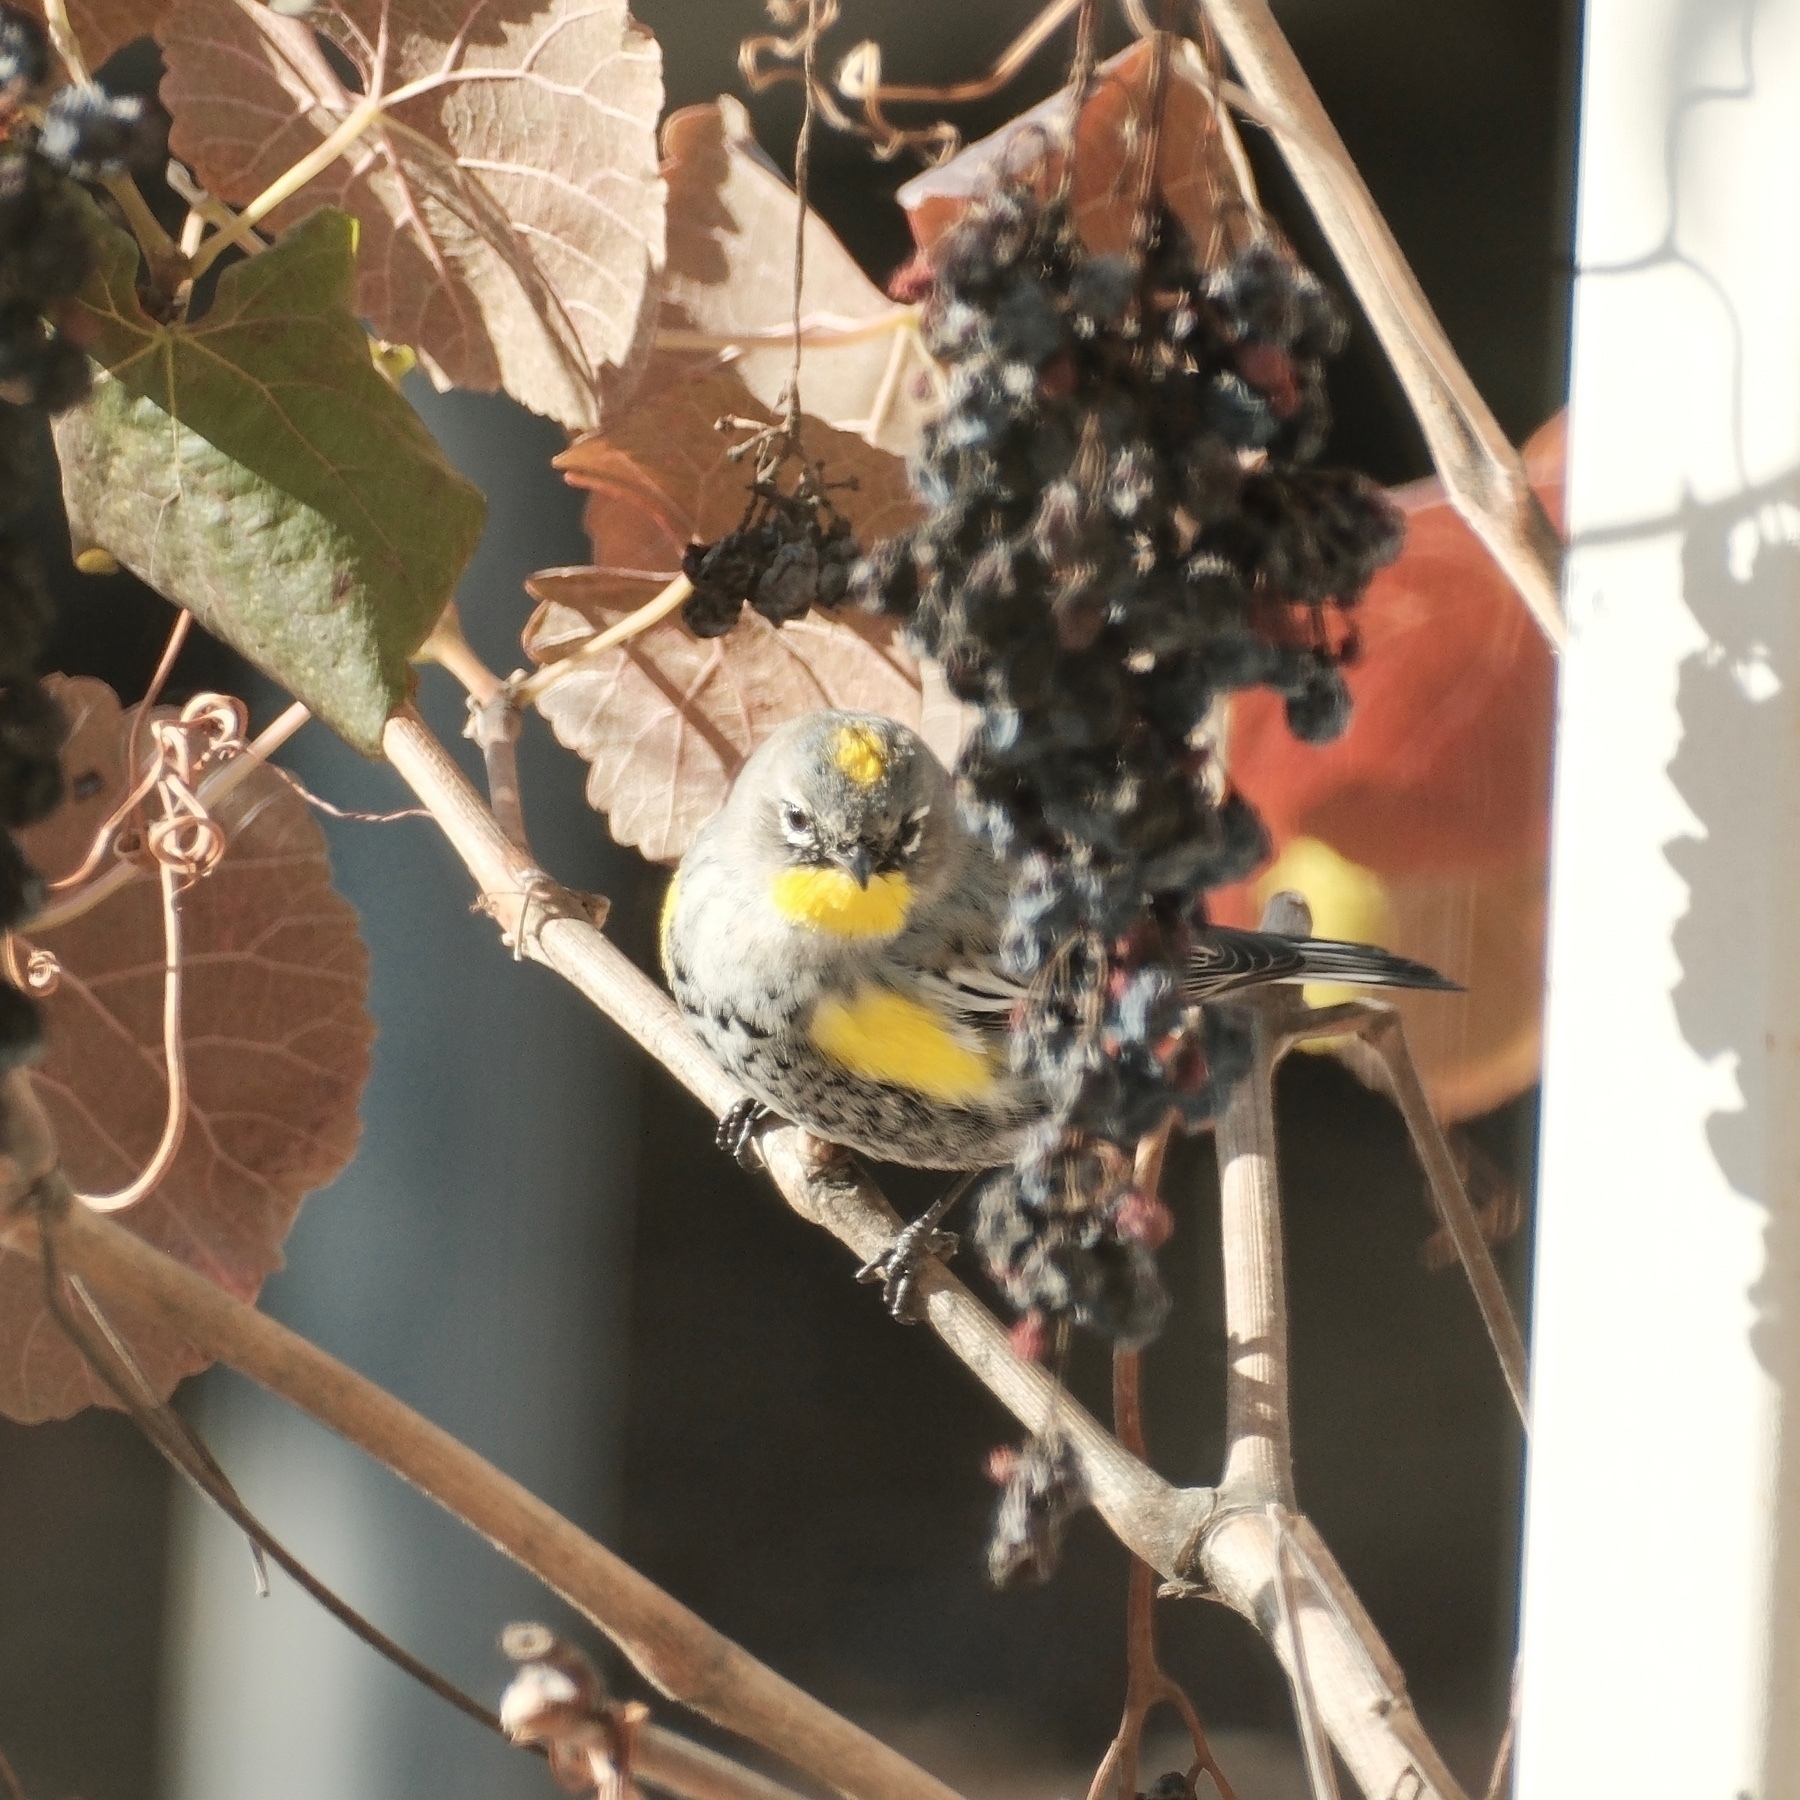 a grey bird with yellow patches investigates a clump of dessicated grapes